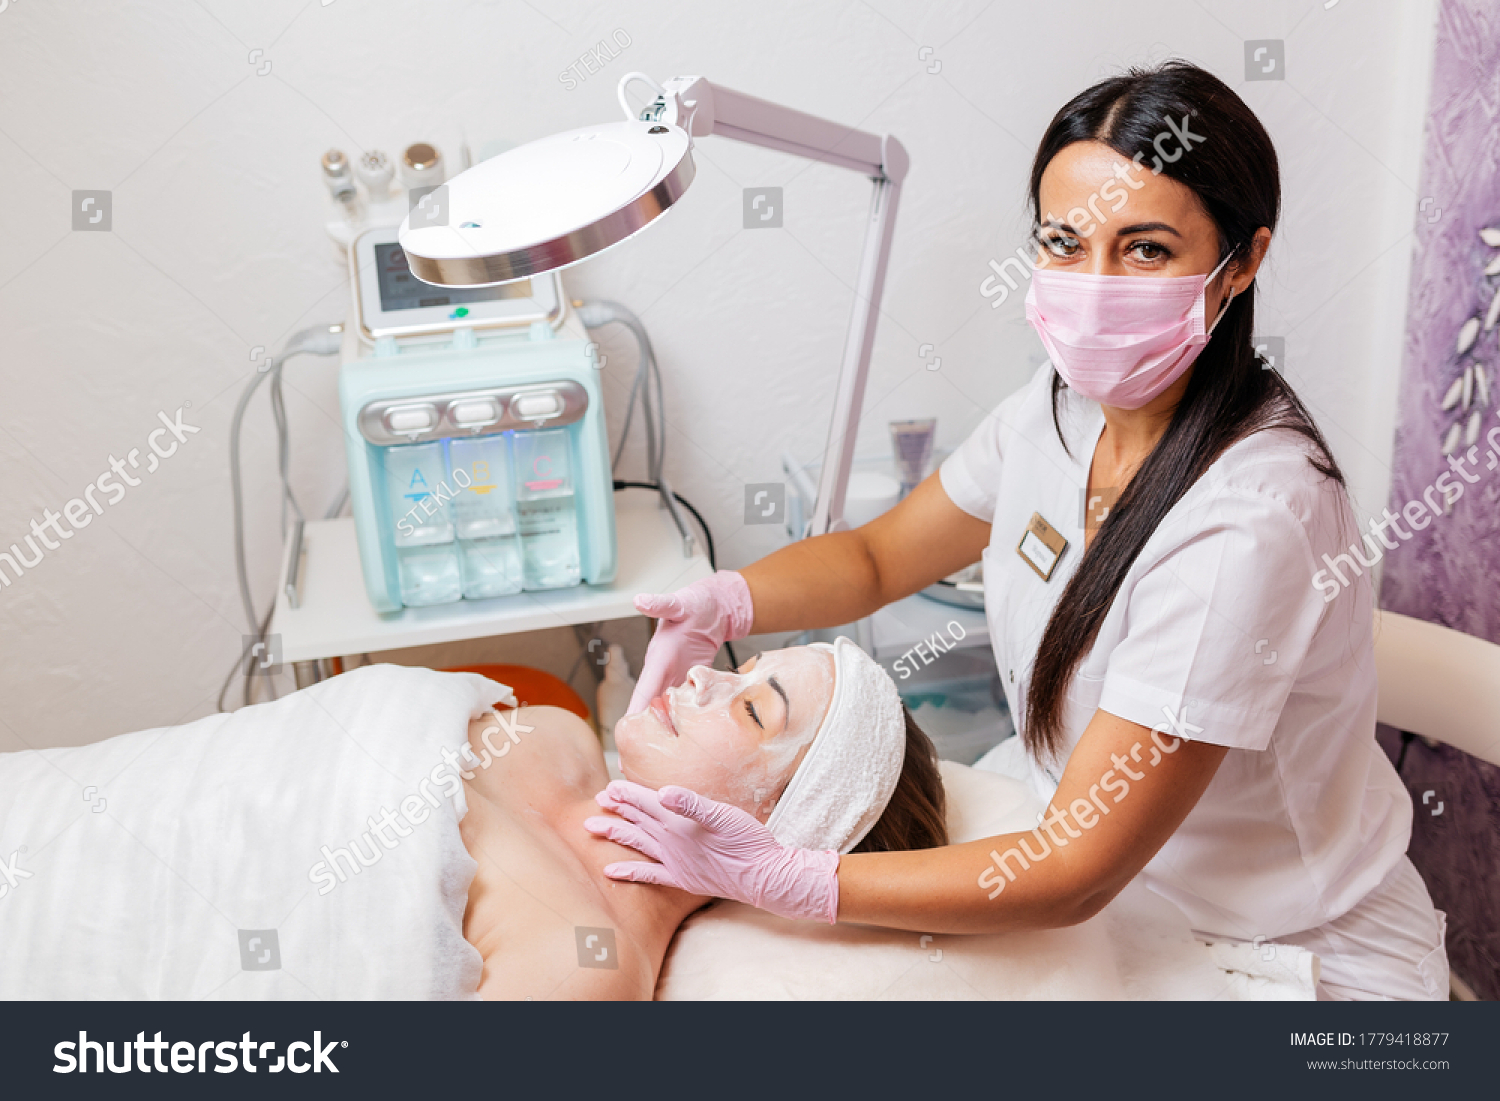 A cosmetologist in a medical mask and rubber gloves applies a cream mask to the client's face. Top view. In the background, a cosmetology device. Concept of cosmetology during the pandemic #1779418877